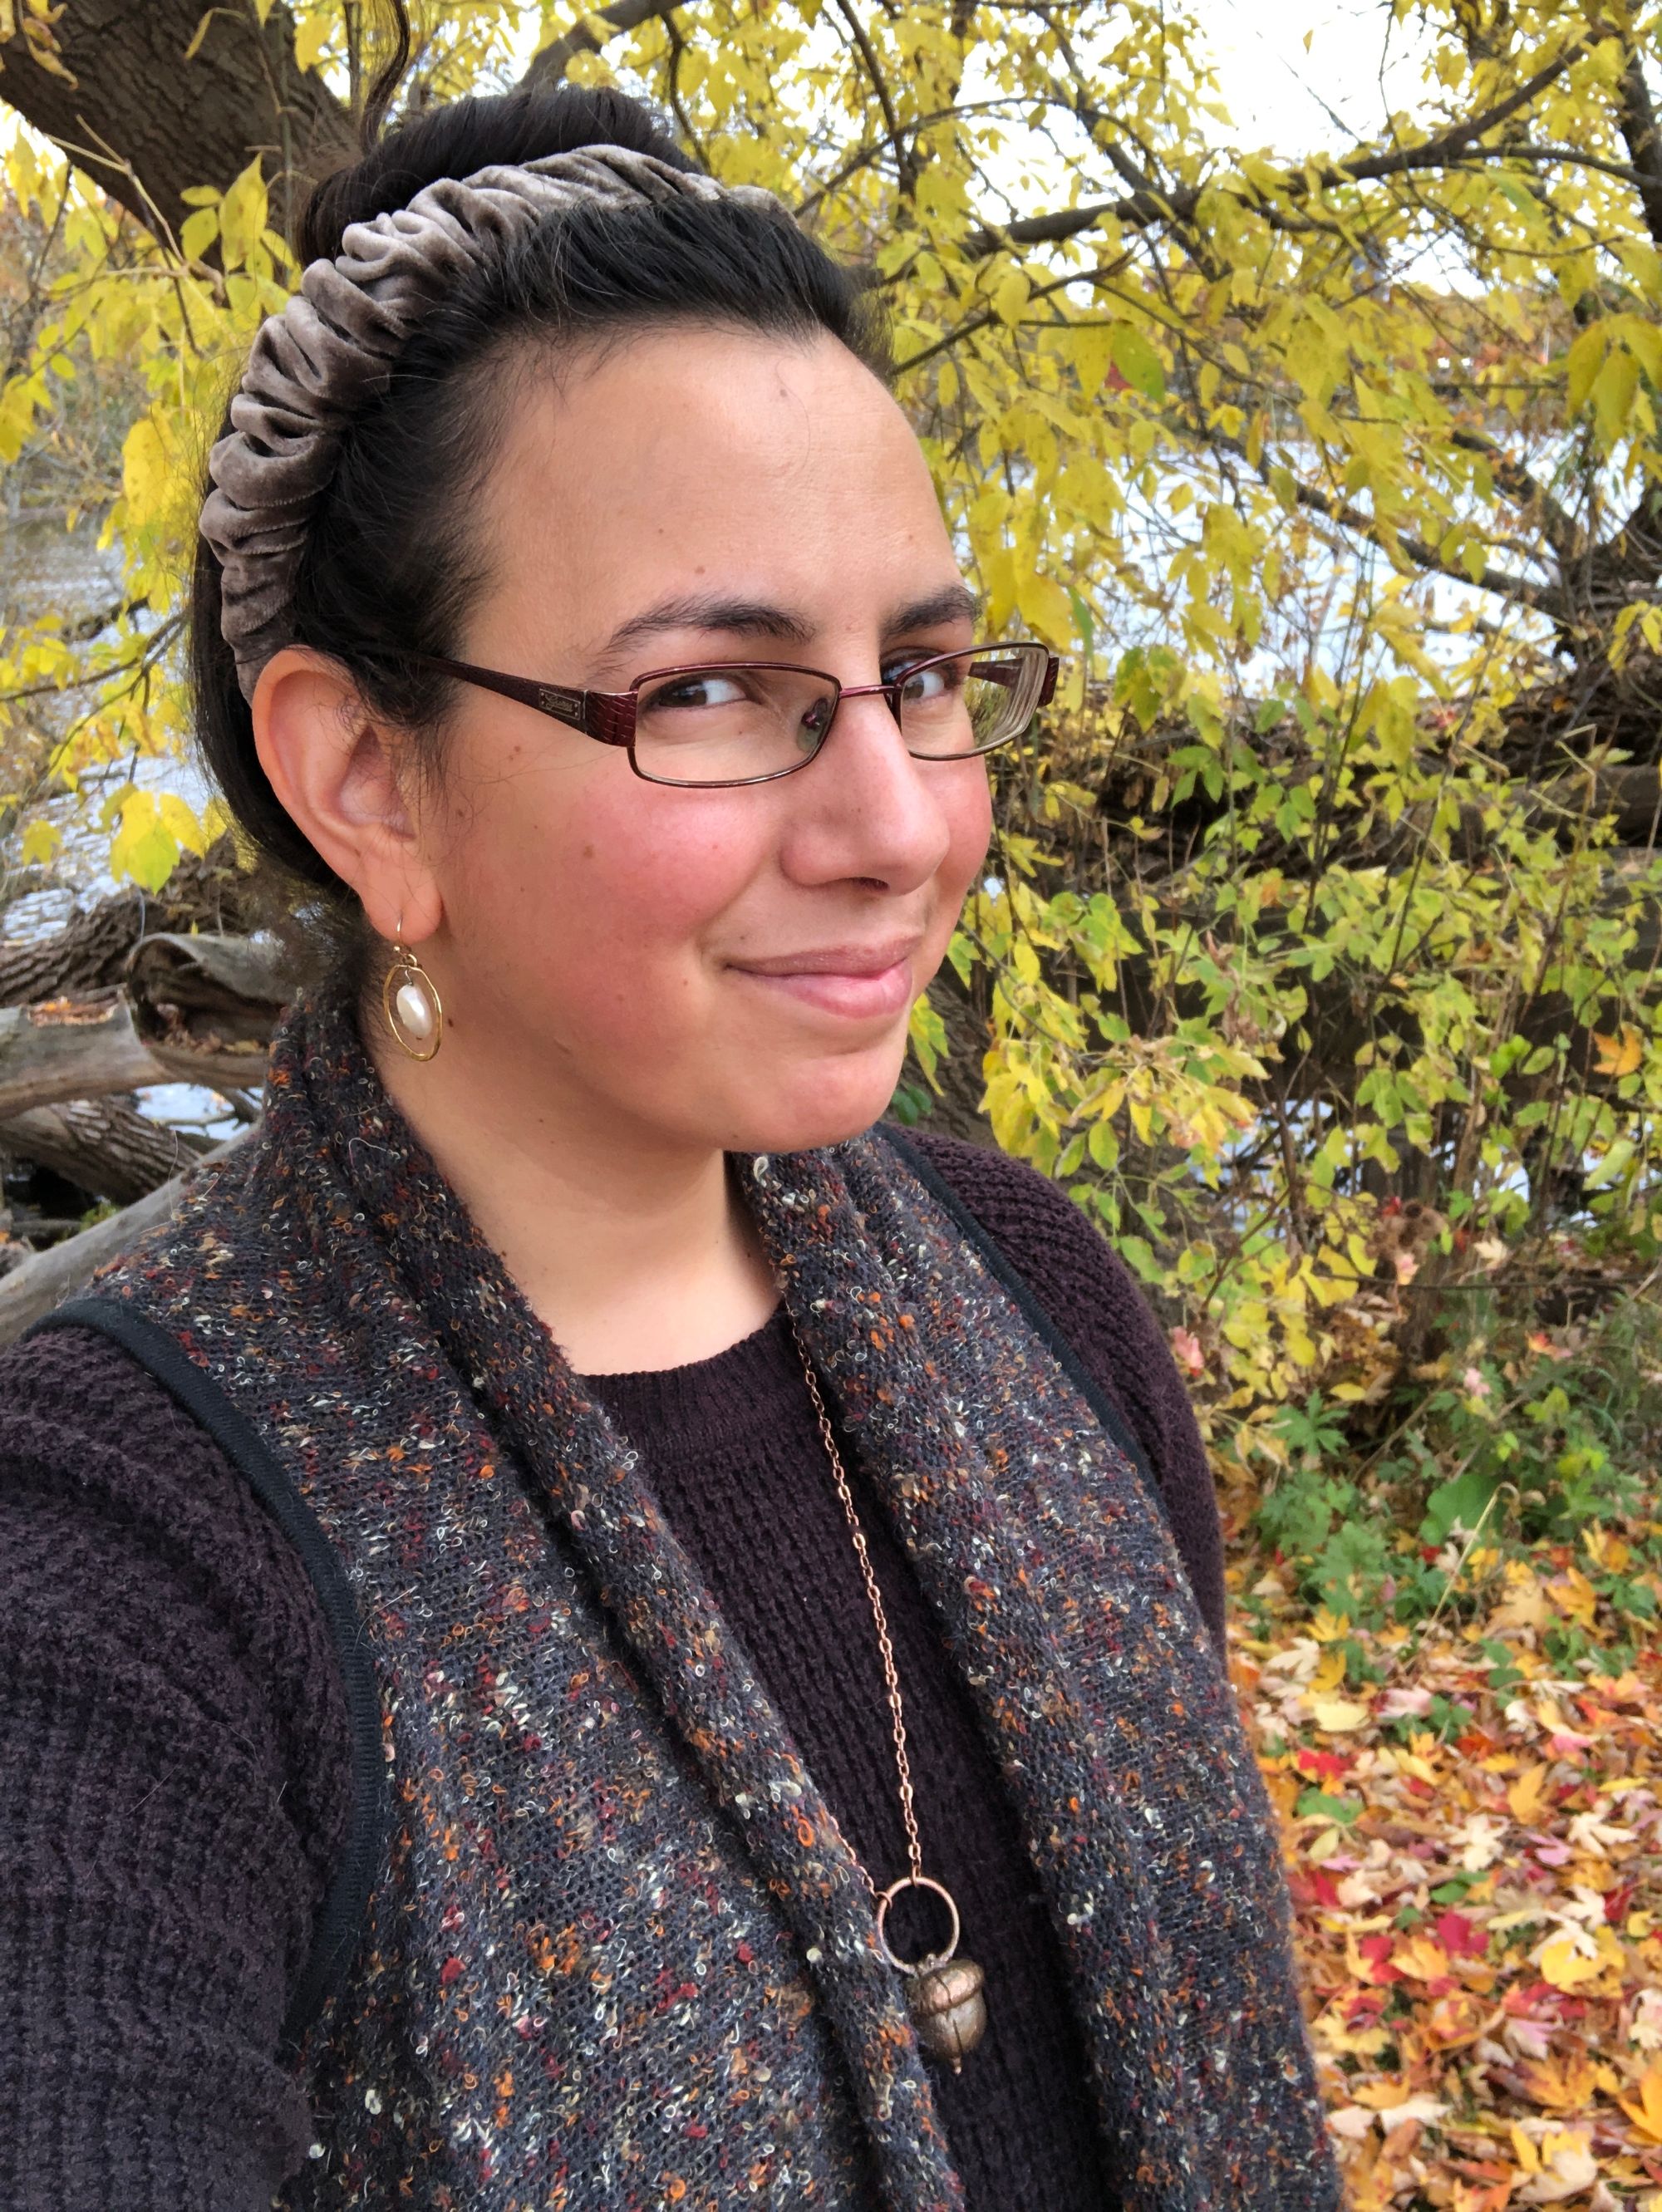 Selfie depicting me in a three quarter turn to camera, smiling with mouth closed, wearing rectangular glasses with a metal frame and my dark hair in a high bun. Behind me is a colourful mess of autumn leaf-fall on the ground and a yellow-green drapery of leaves on trees, beyond which is a river. My outfit's autumnal in texture and colour: a thick dark brown rib-knit sweater with a long sleeveless cardigan atop it, flecked with colours that pick up on the leaf-fall, and accessorized with the following jewelryL a long copper-coloured necklace that ends in a bronzed acorn; flat pearl earrings floating in a ring of gold; and a scrunched grey-brown velvet headband.